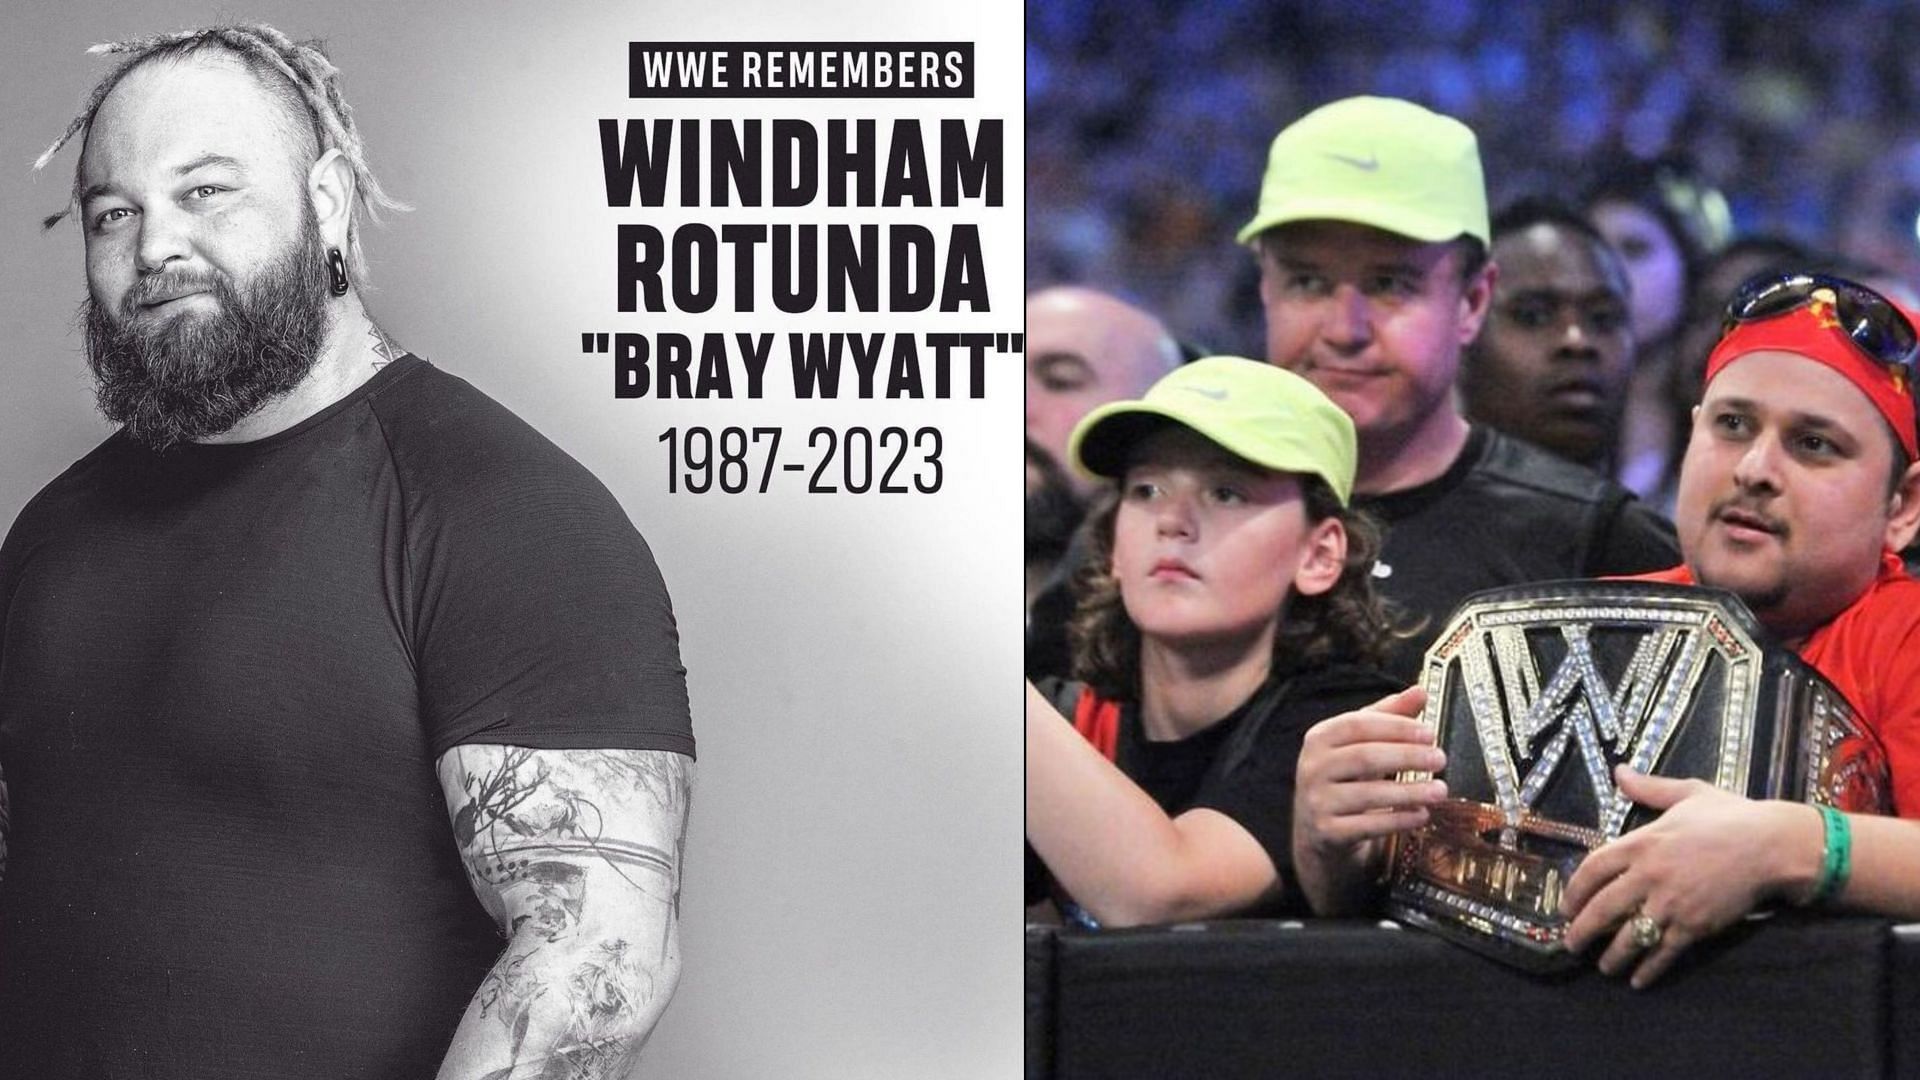 Former WWE Champion Bray Wyatt sadly passed away earlier this month